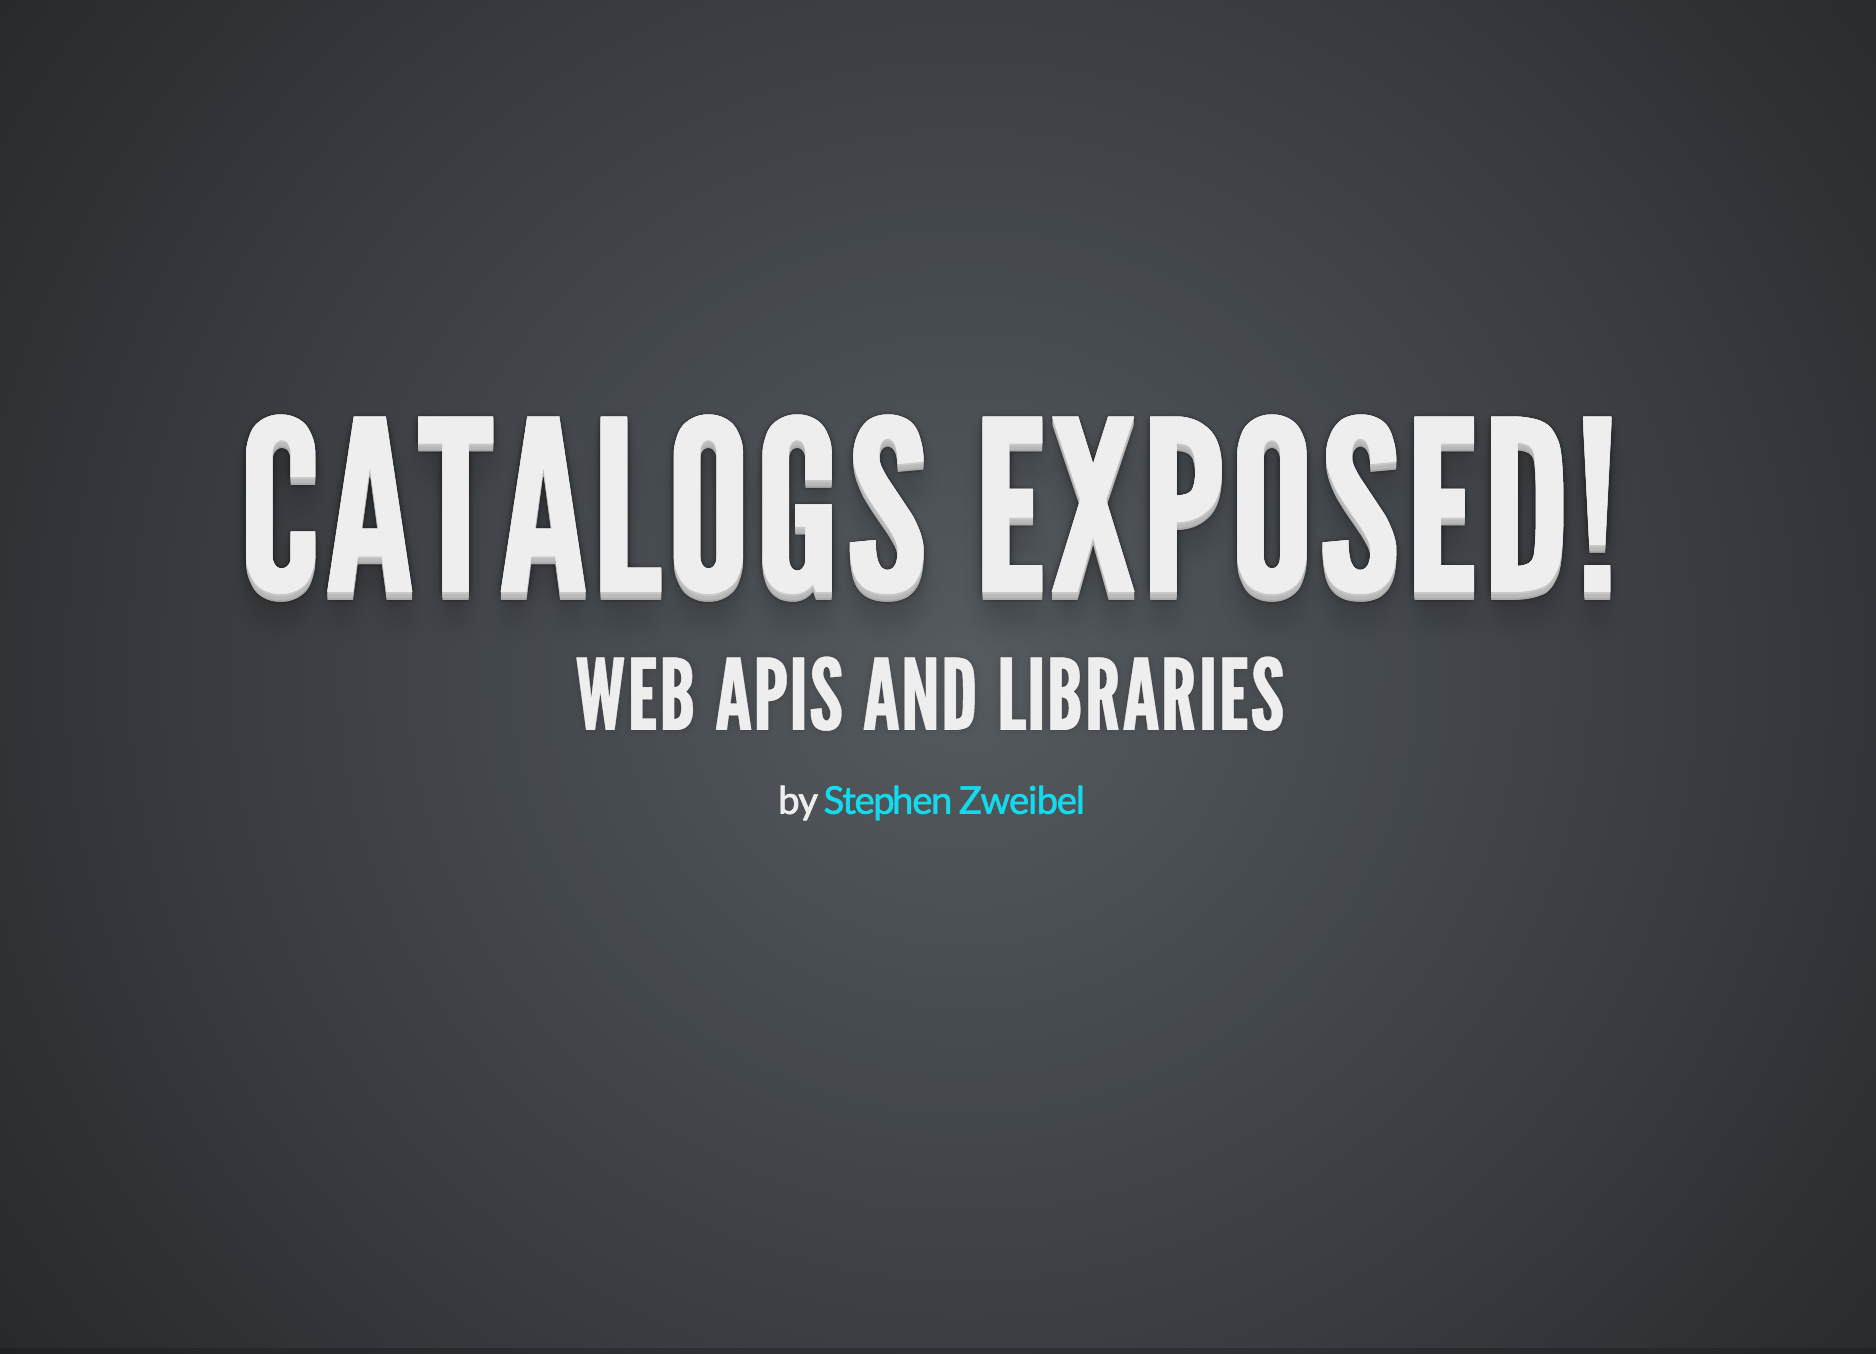 Catalogs Exposed! Web APIs and Libraries